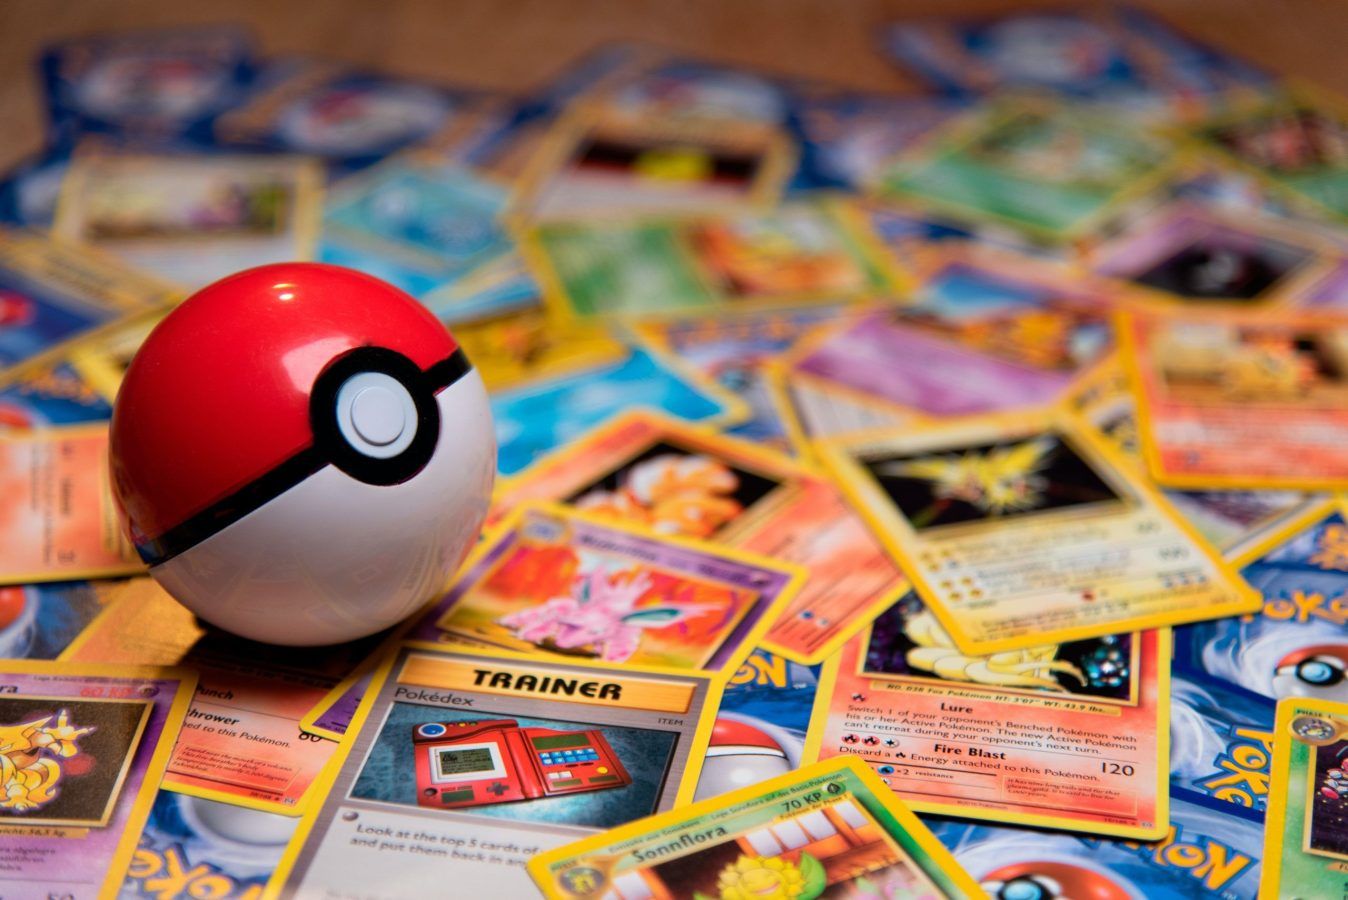 Pokemon card sells for record-breaking $230,000 - CNET